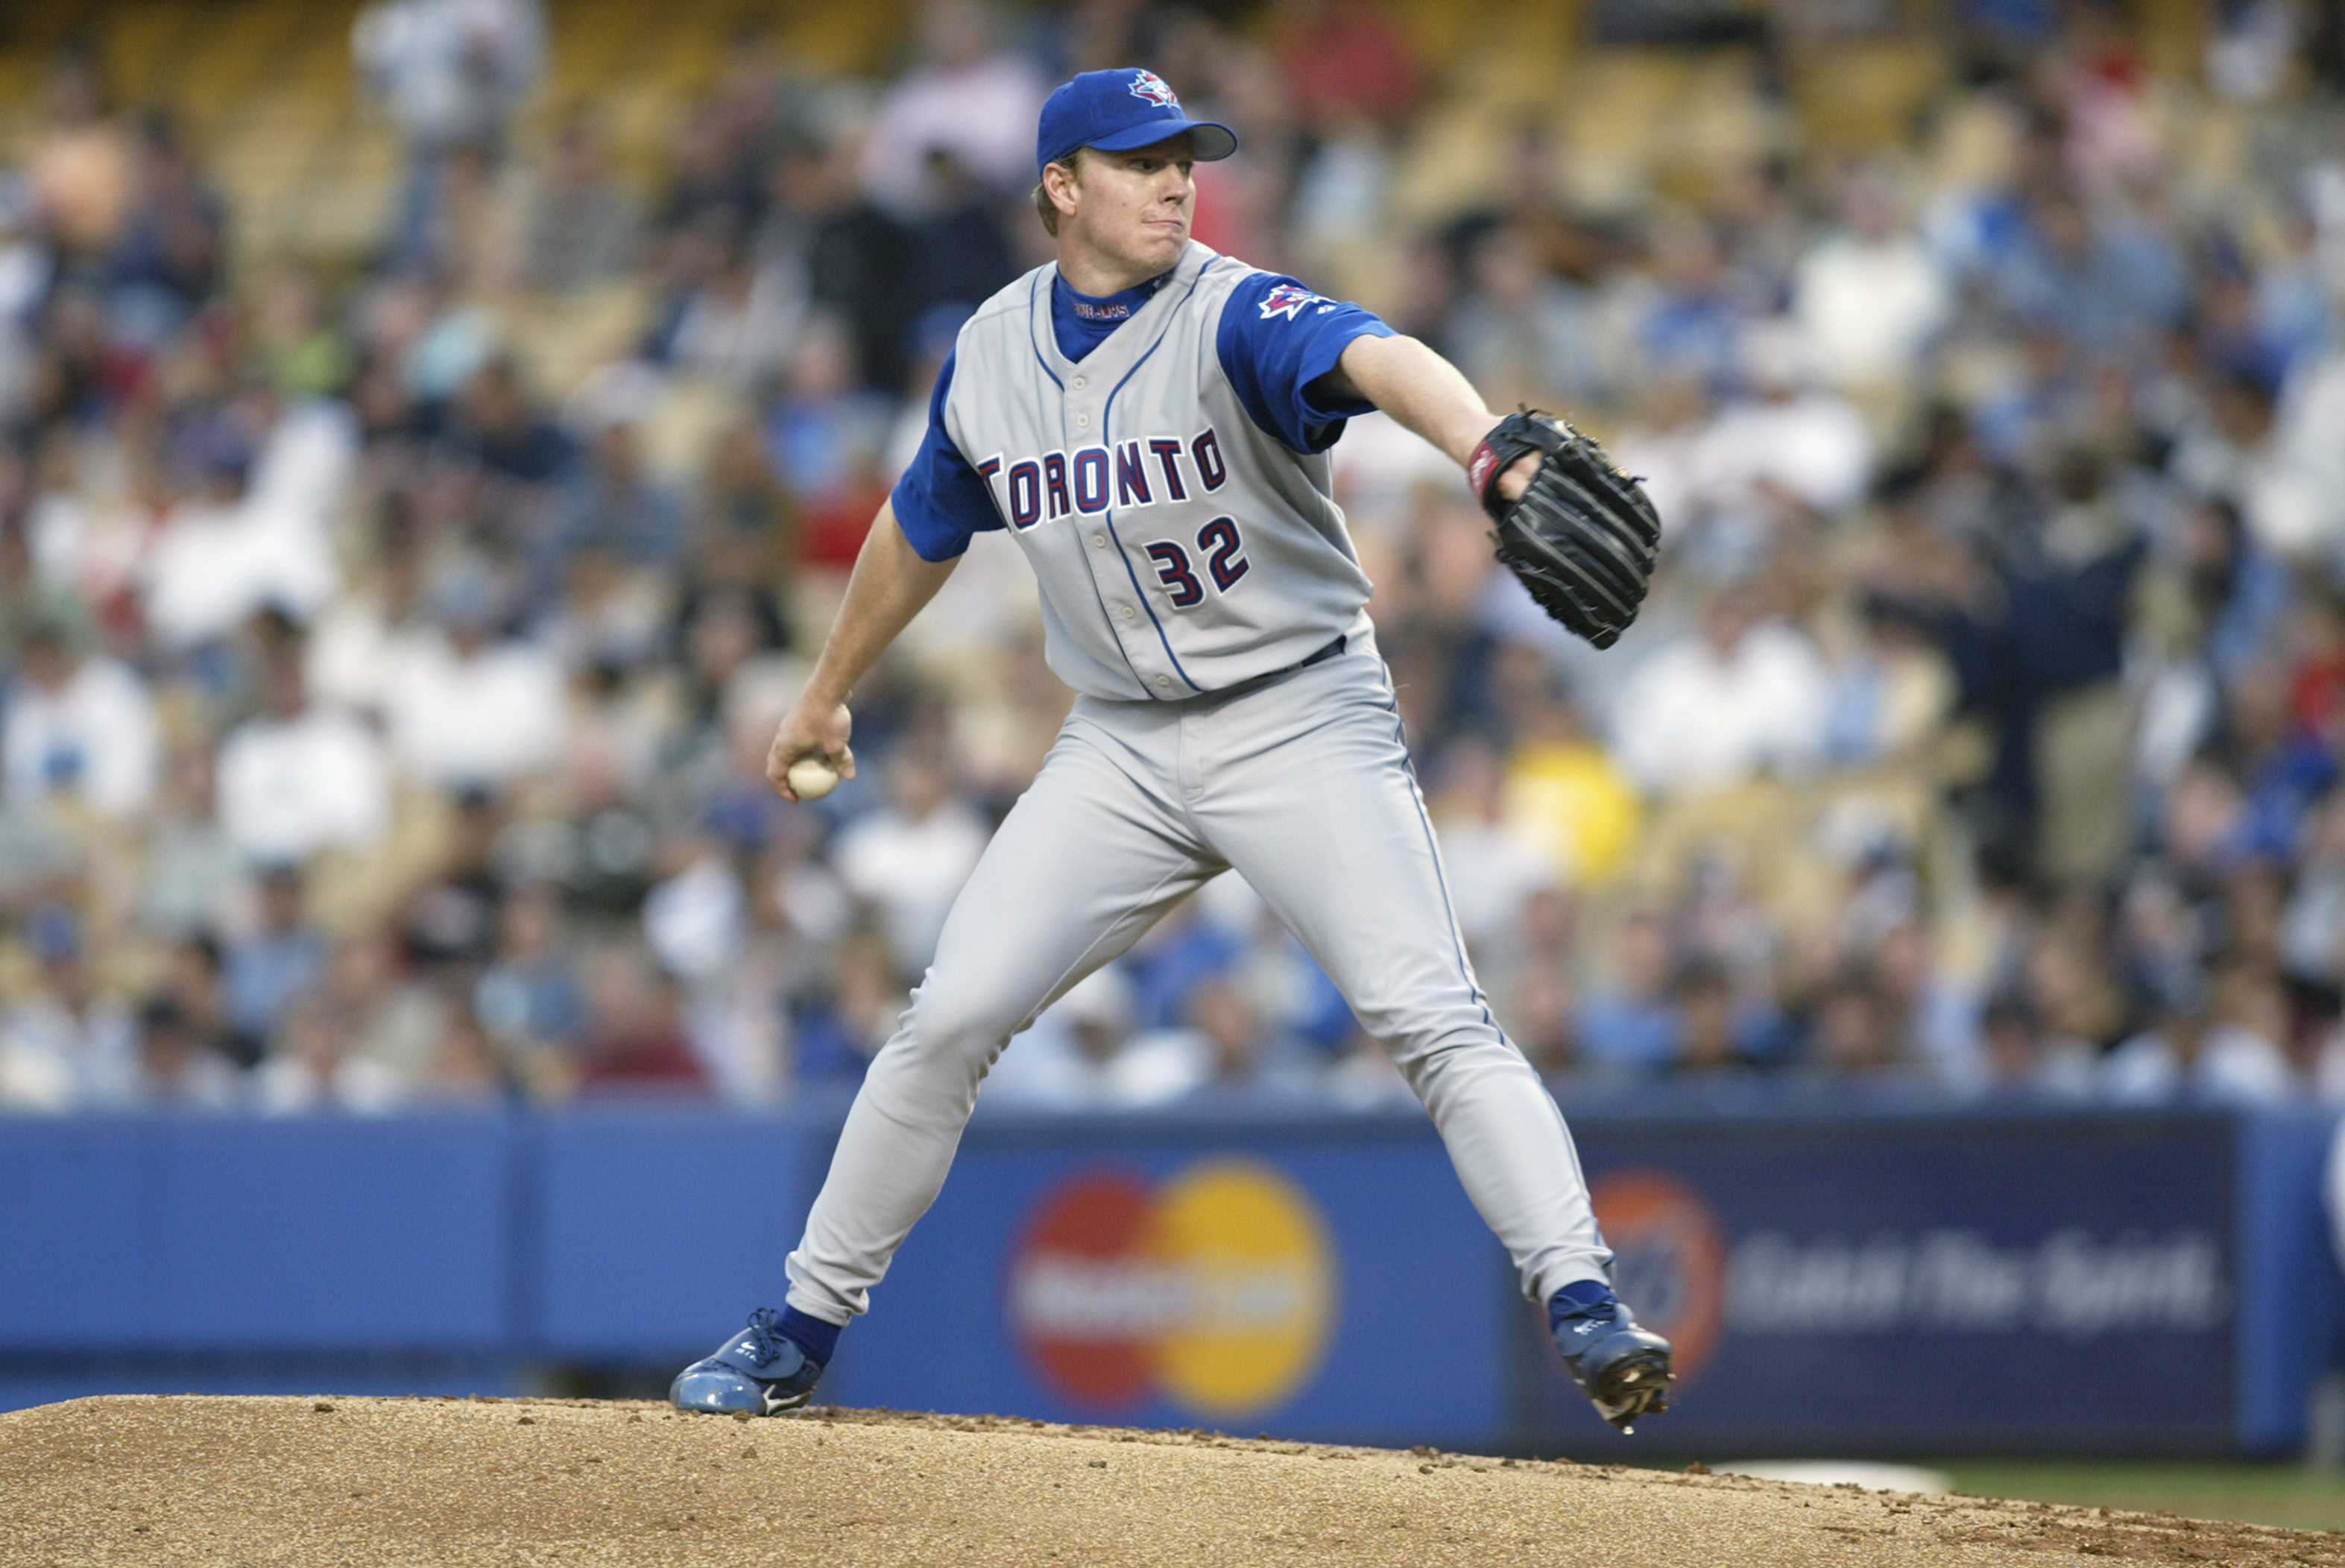 Roy Halladay: Blue Jays honor pitcher with emotional jersey retirement